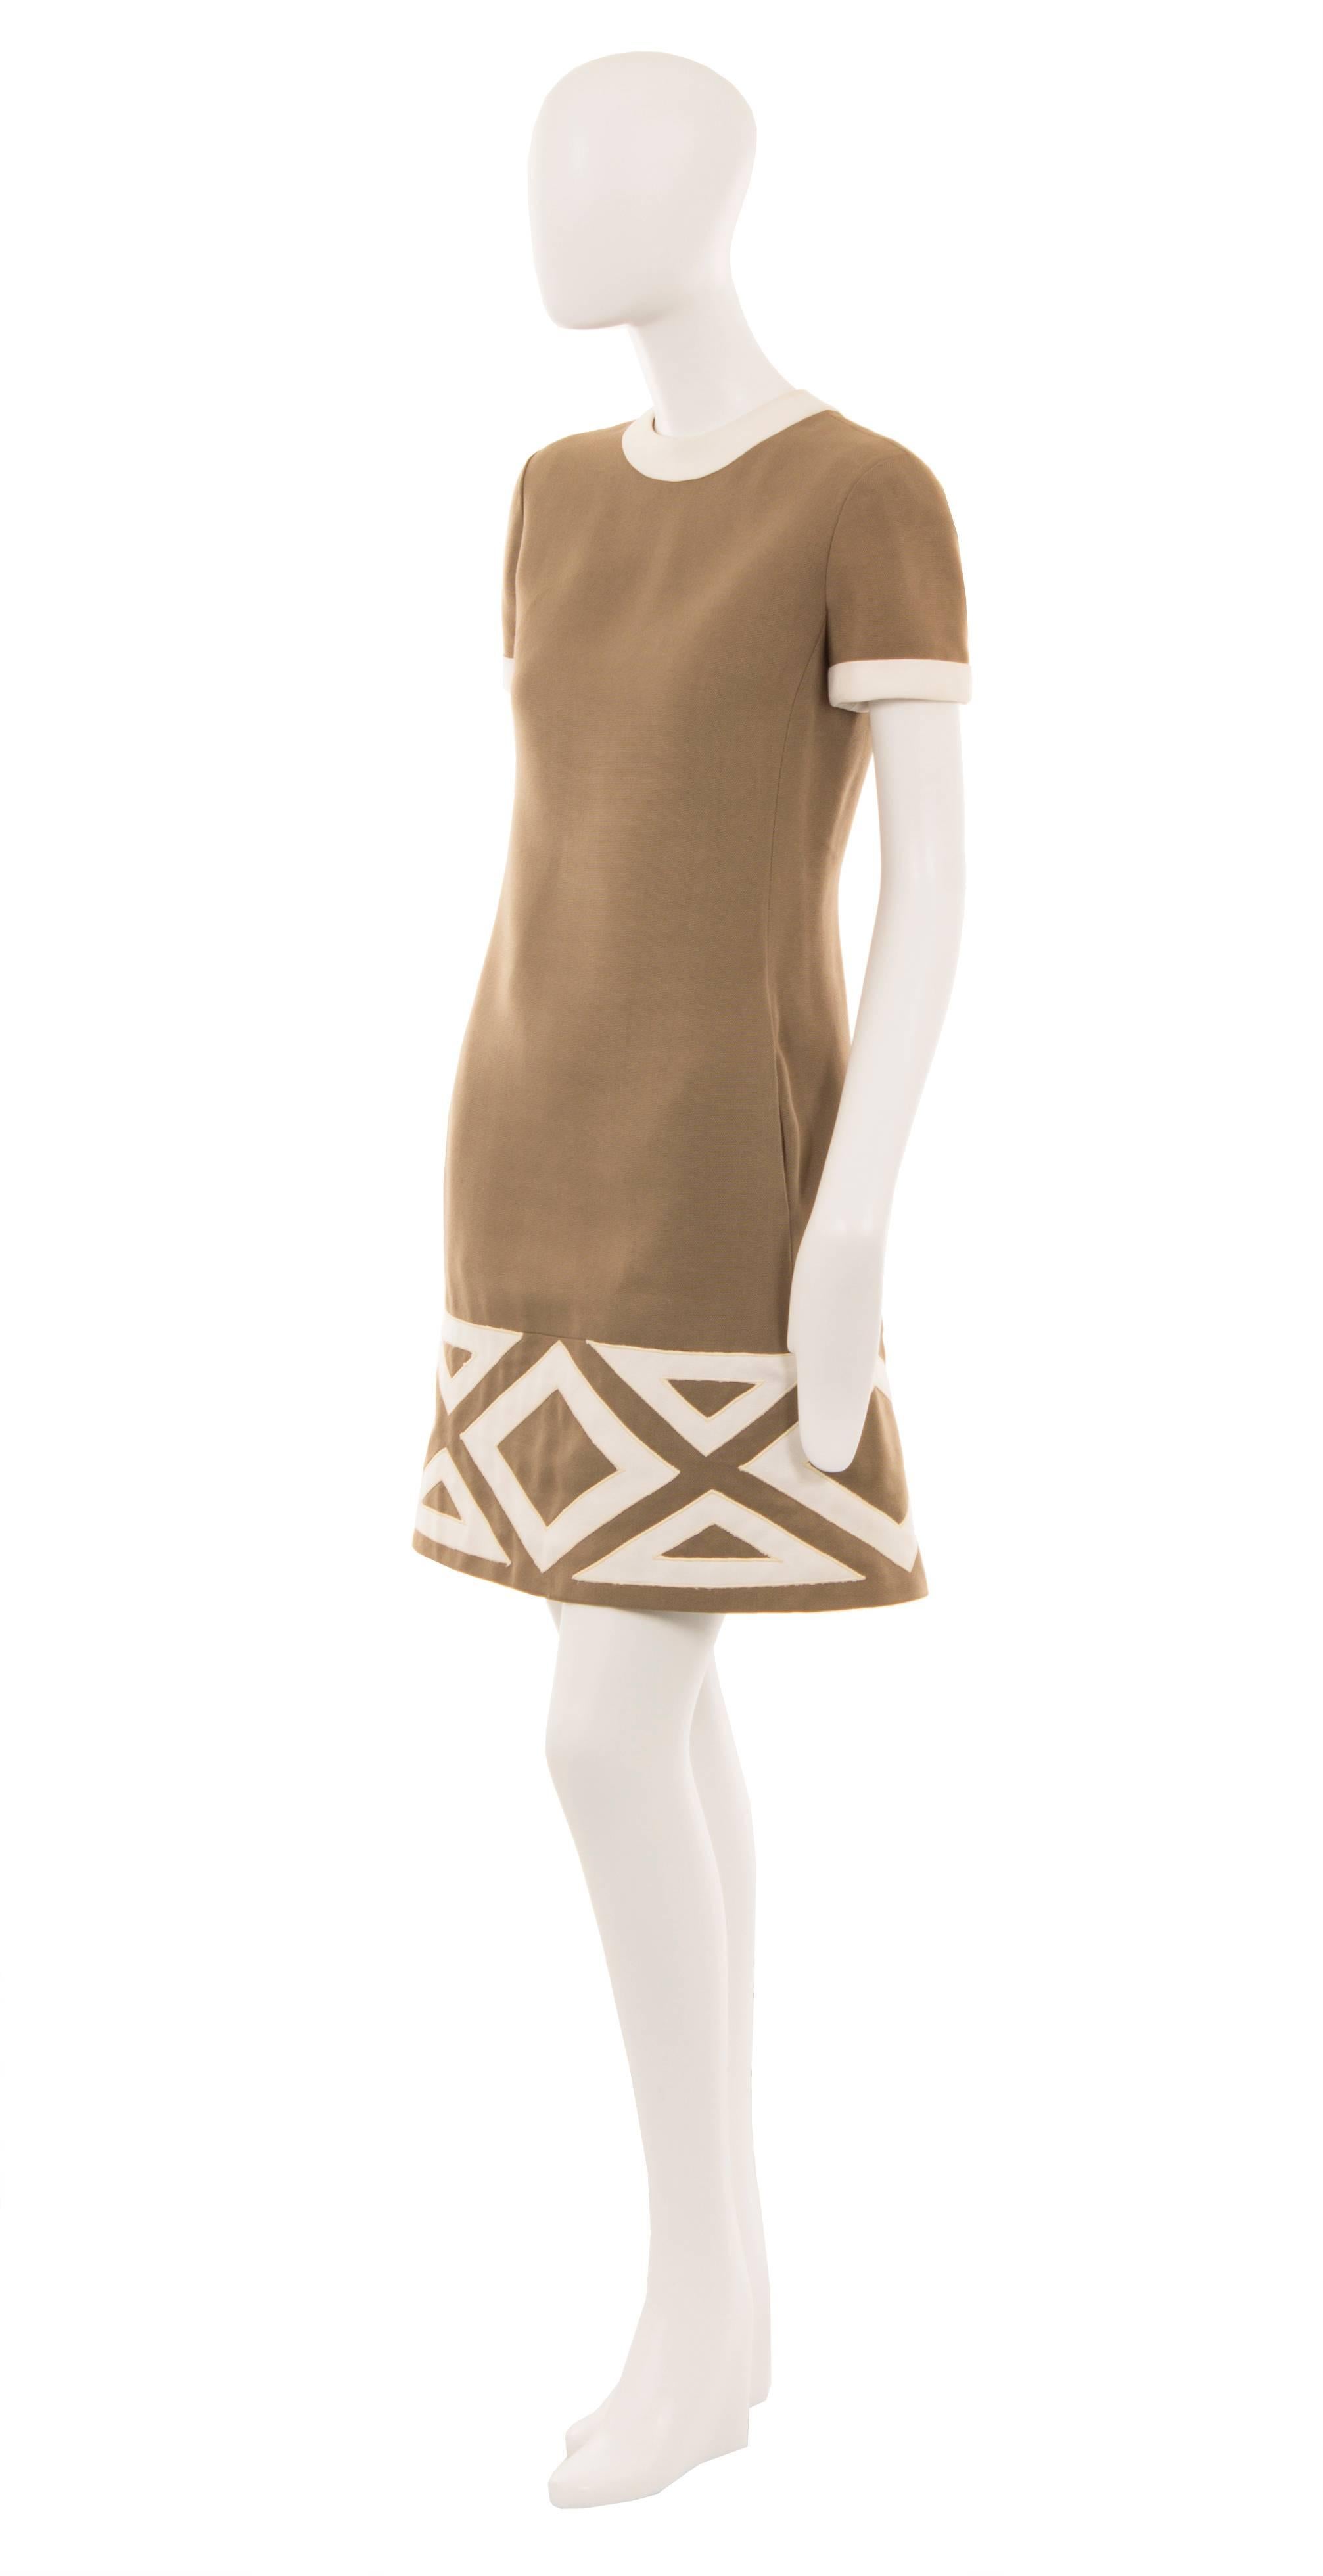 Super chic and easy to wear, this Pierre Cardin shift dress is constructed of brown linen and features an ivory trim to the neckline and short sleeves. The classic 60s silhouette is perfect for work or everyday and the dress features a bold diamond